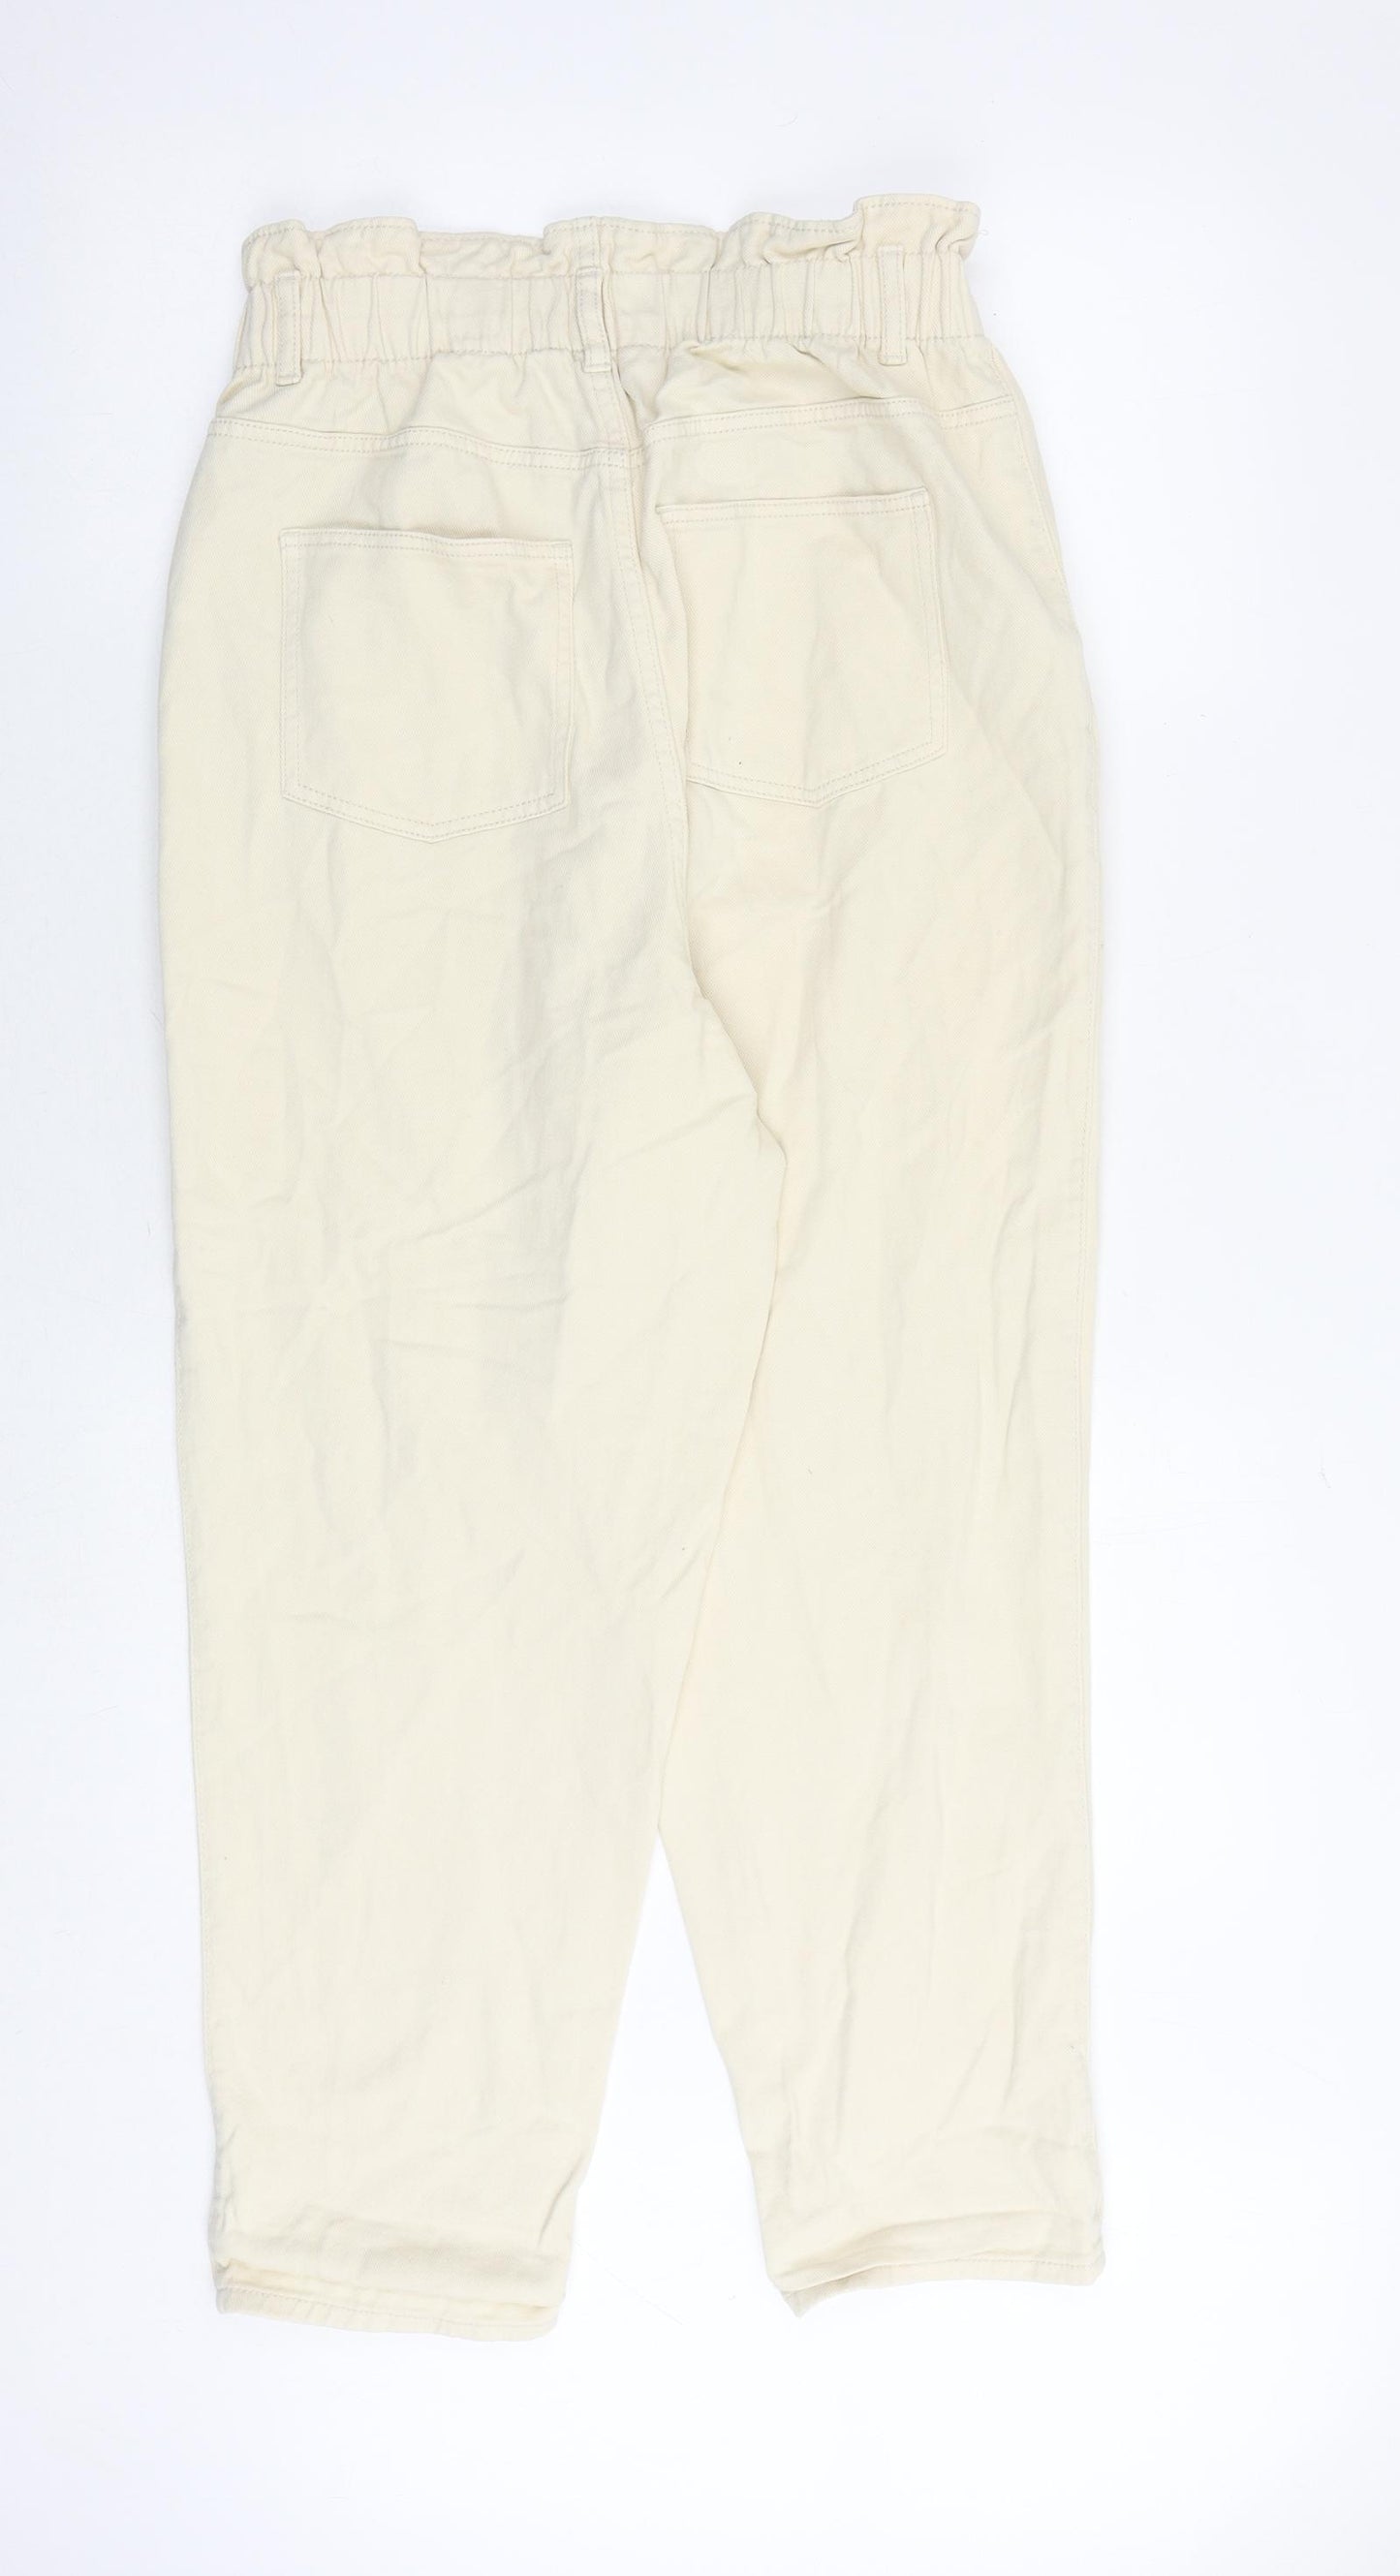 H&M Womens Yellow Cotton Tapered Jeans Size 14 Regular Zip - Paperbag Waist